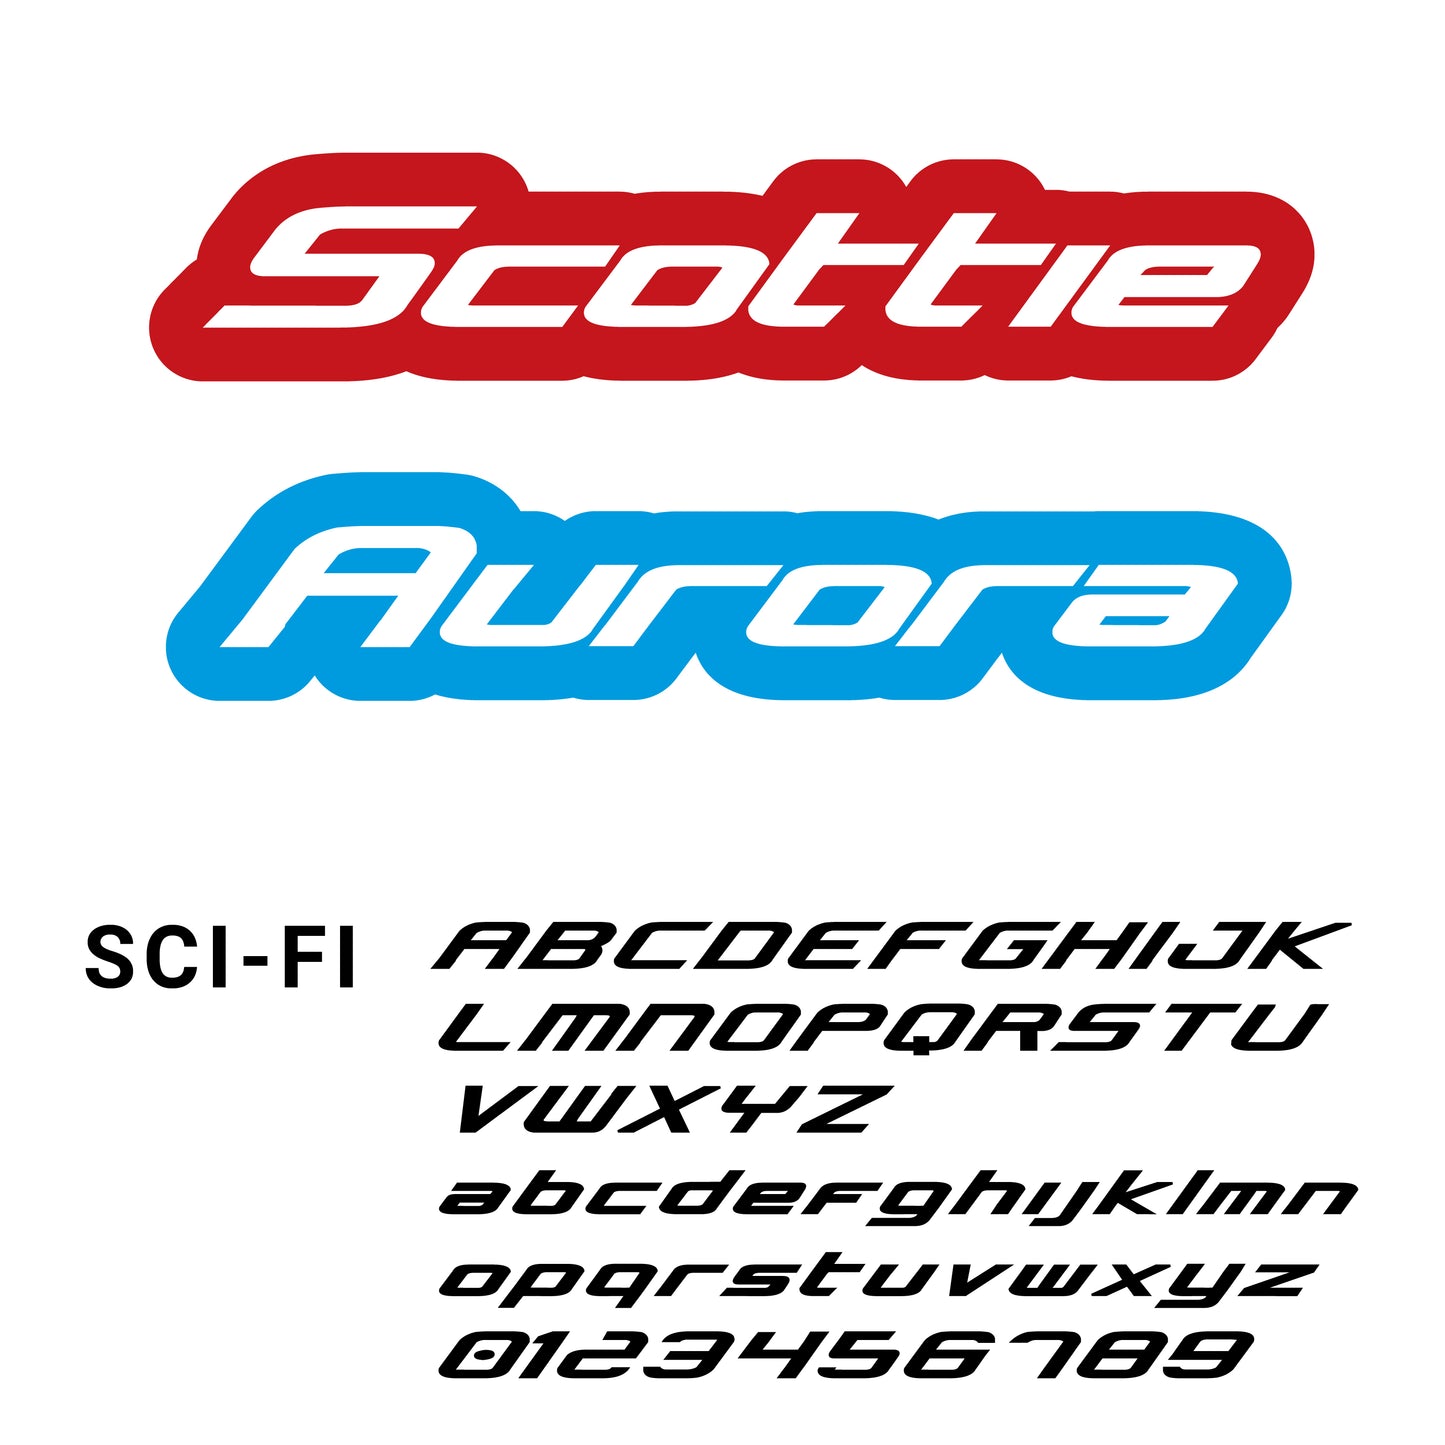 Vinyl cut-contour identification decals shown using a sci-fi font: Futuristic and visually captivating identification decals with a sci-fi font, adding a touch of innovation and uniqueness to the design.